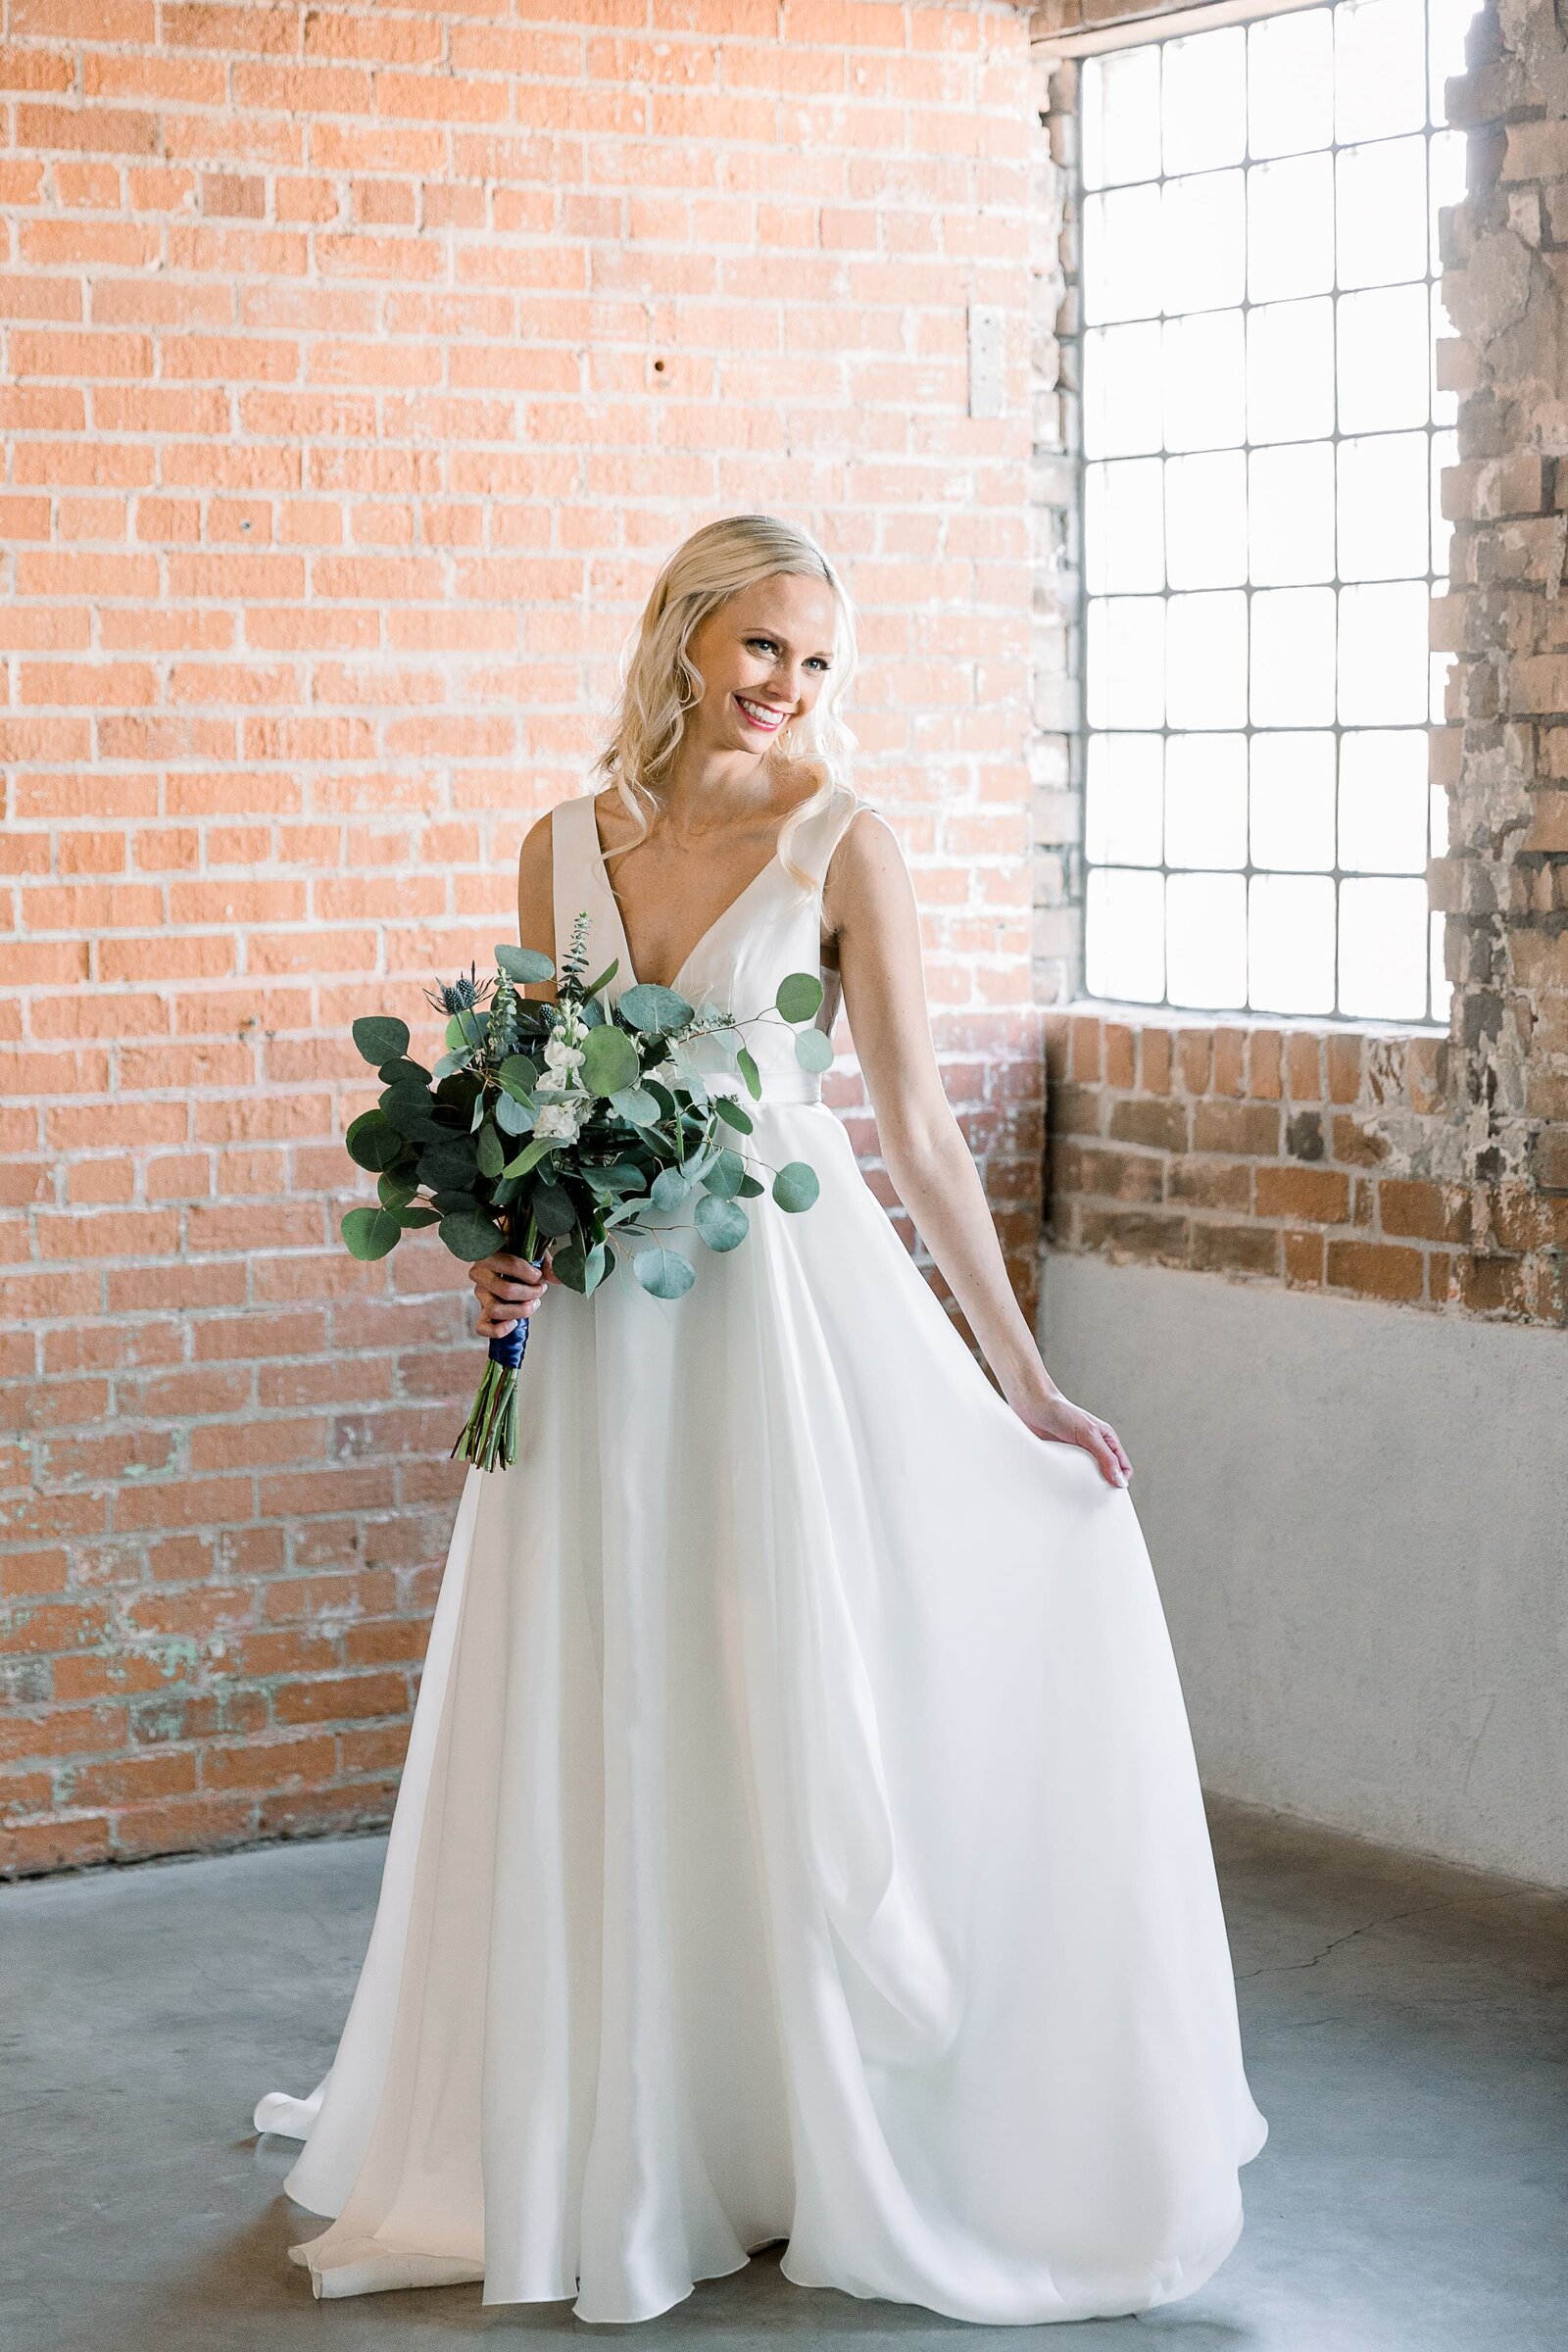 Portrait of a bride at Warehouse 215.